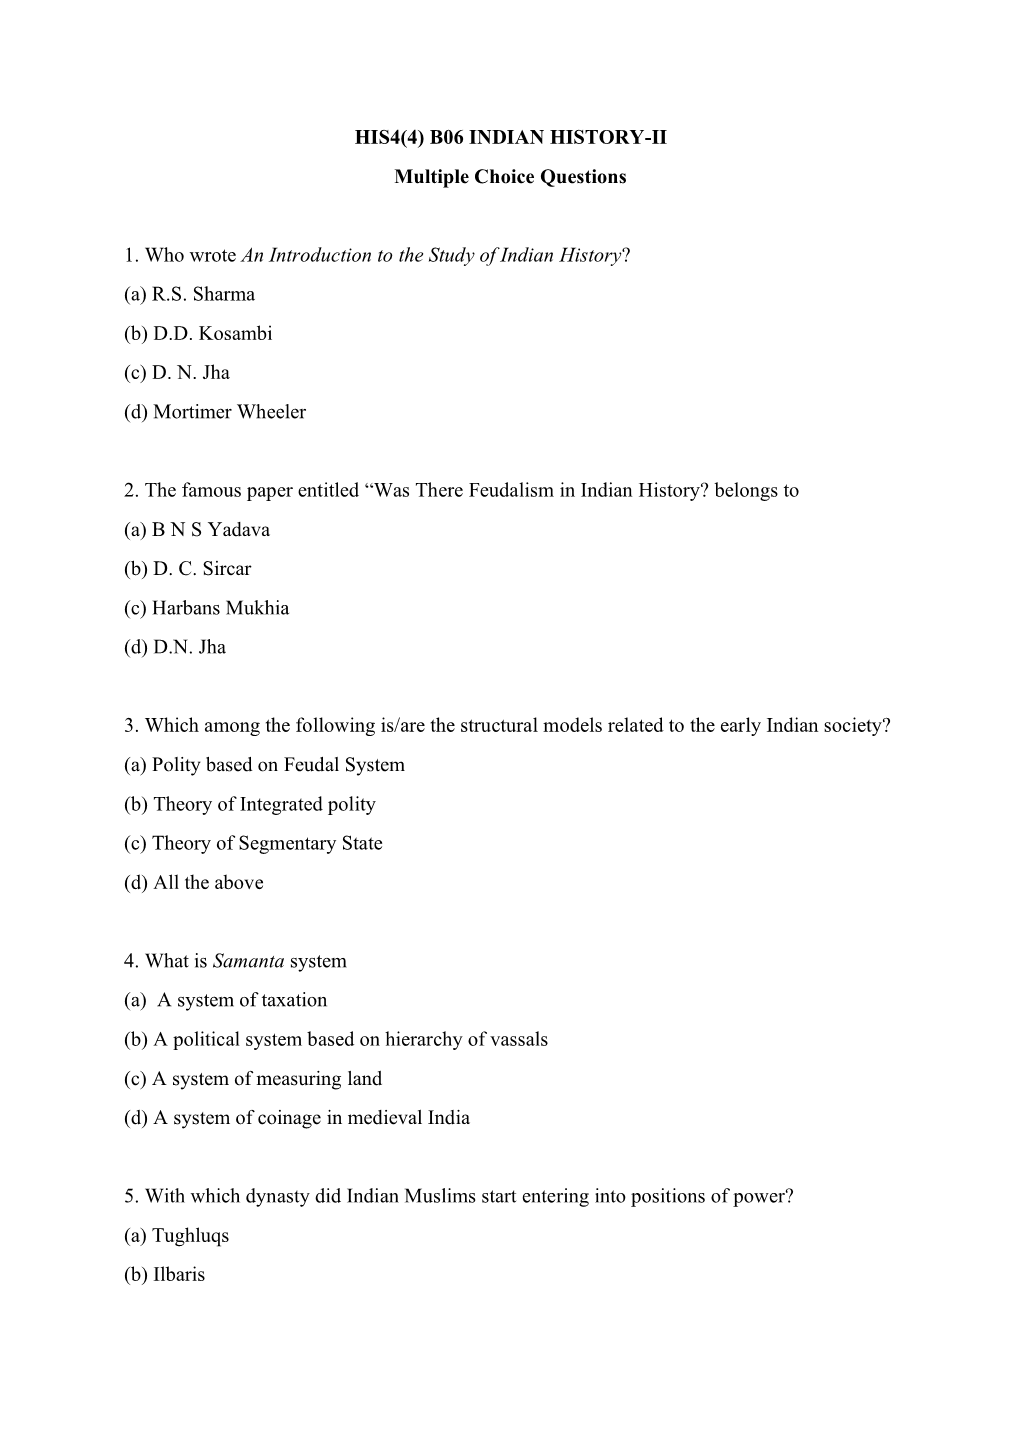 INDIAN HISTORY-II Multiple Choice Questions